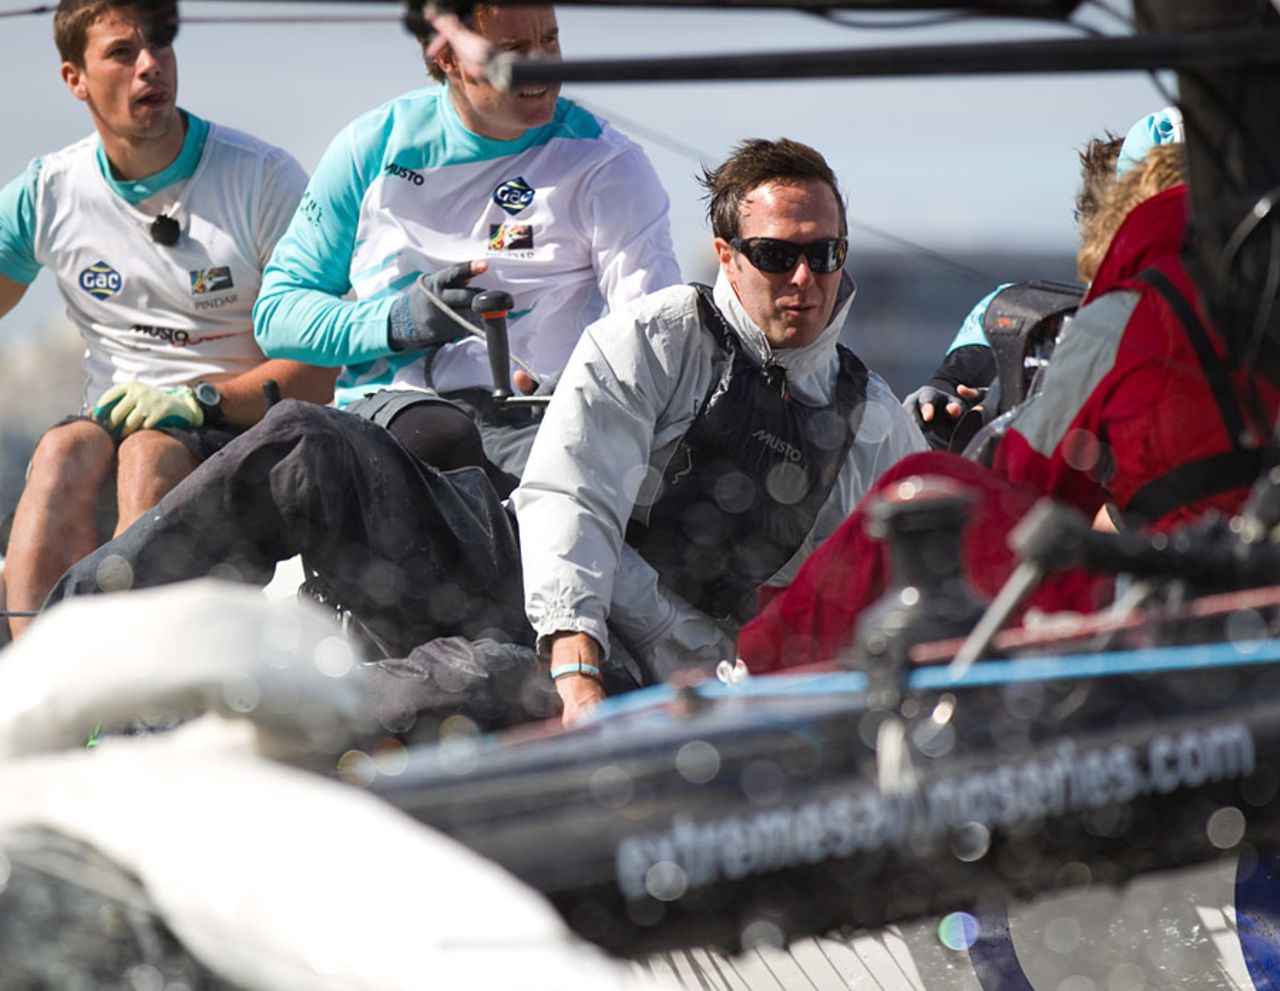 Michael Vaughan will take part in Extreme Sailing, Cardiff, August 30, 2012